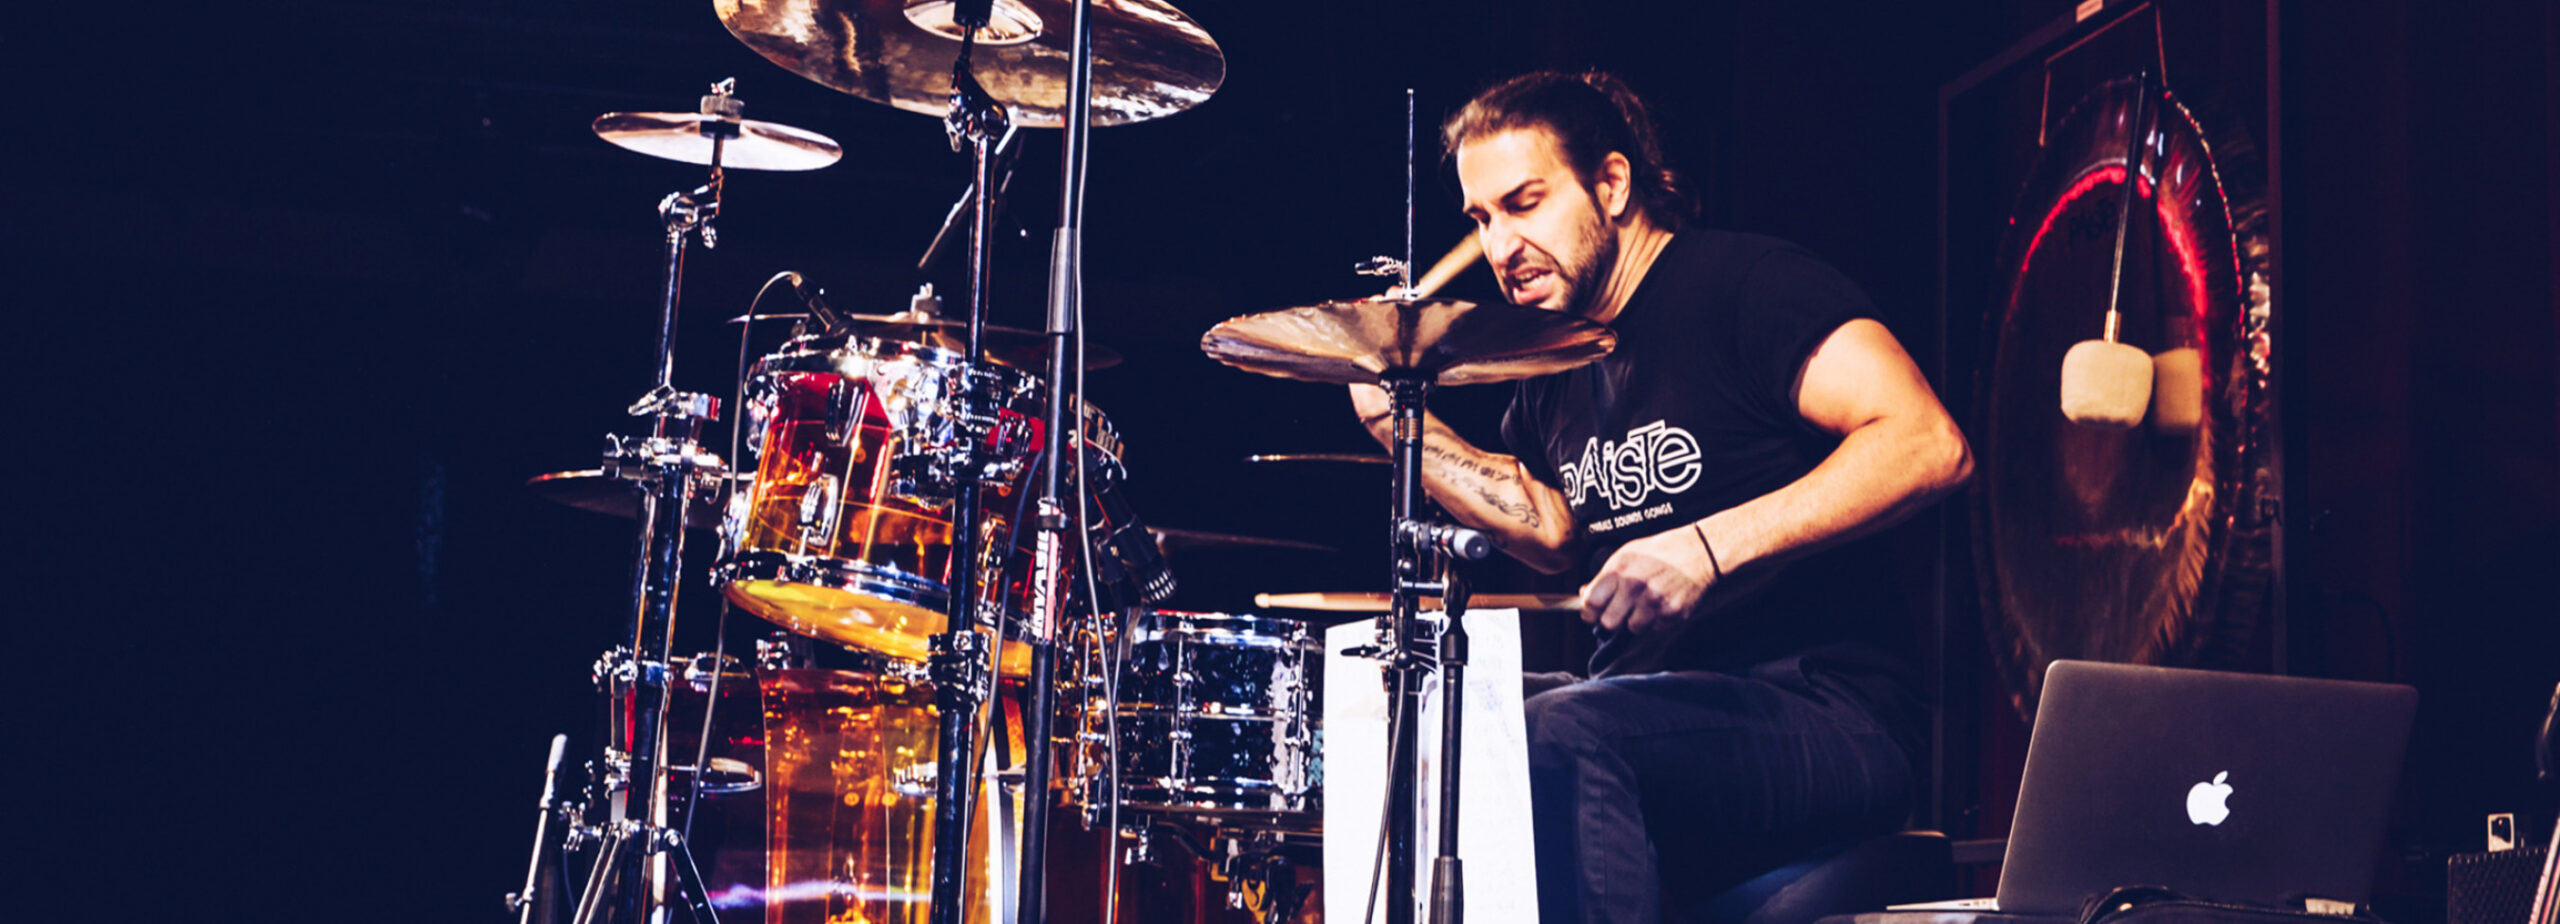 Brian Tichy: ‘I was kicked out of The Dead Daisies’